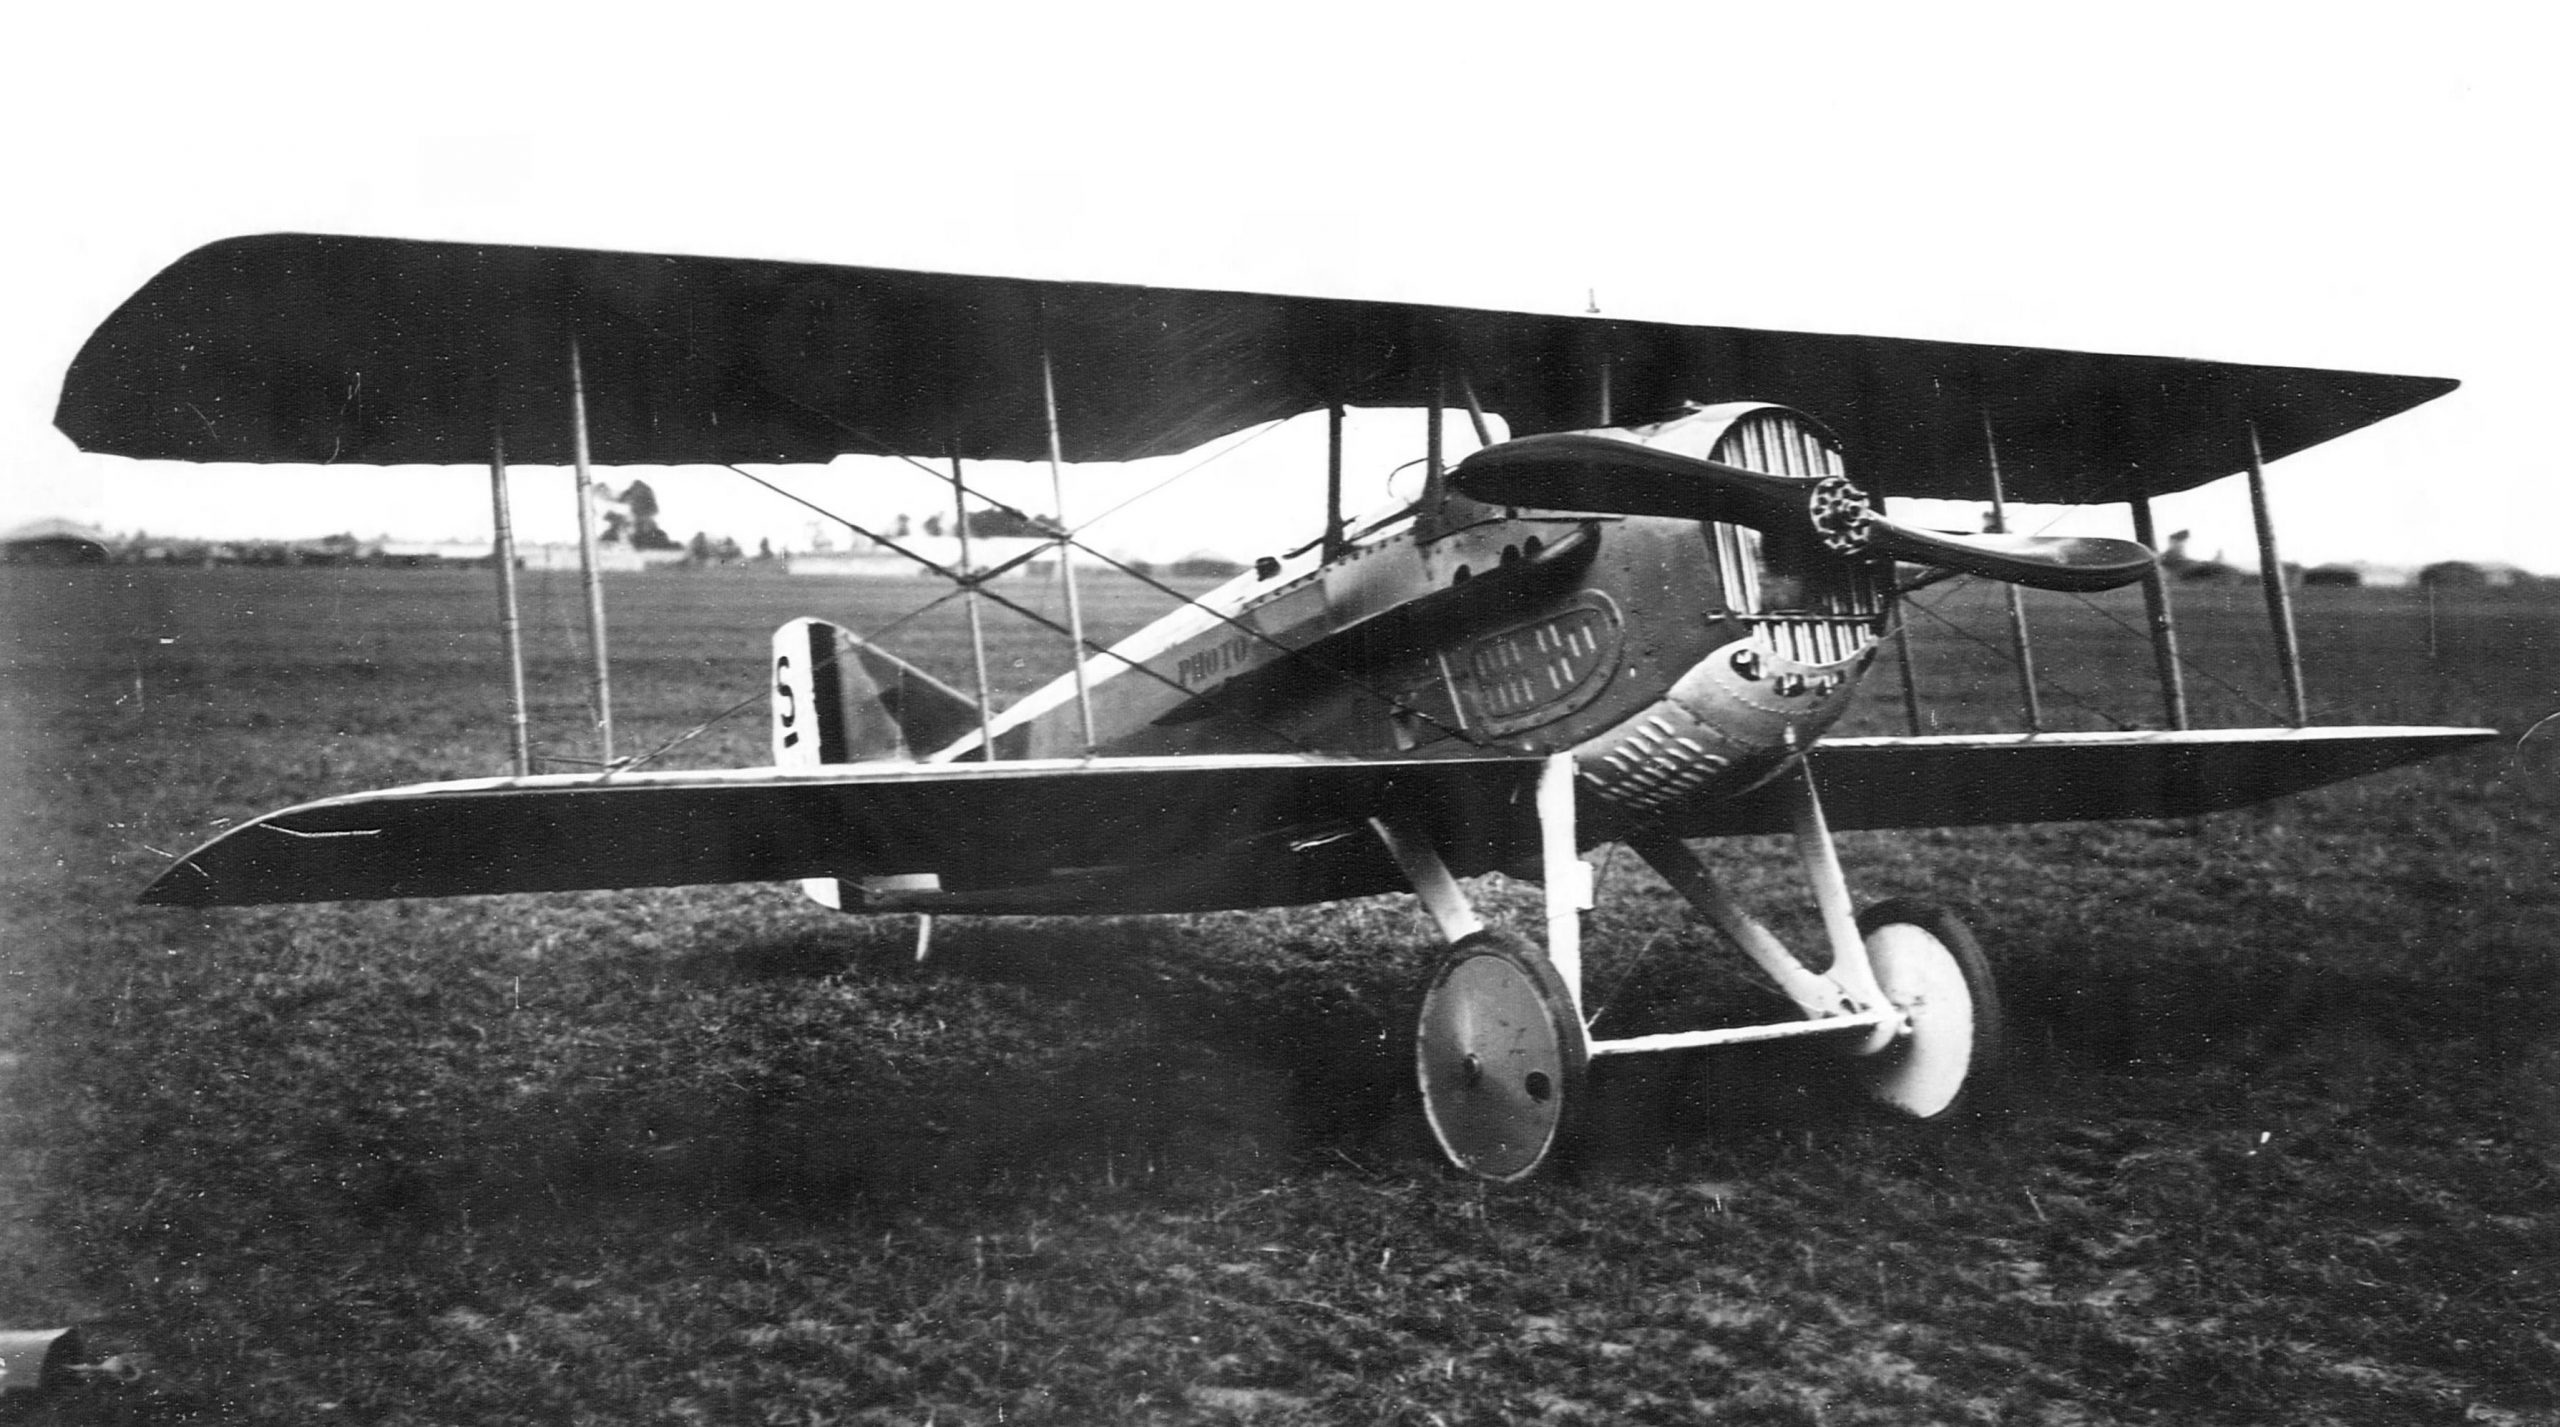 A black and white photograph of a biplane.